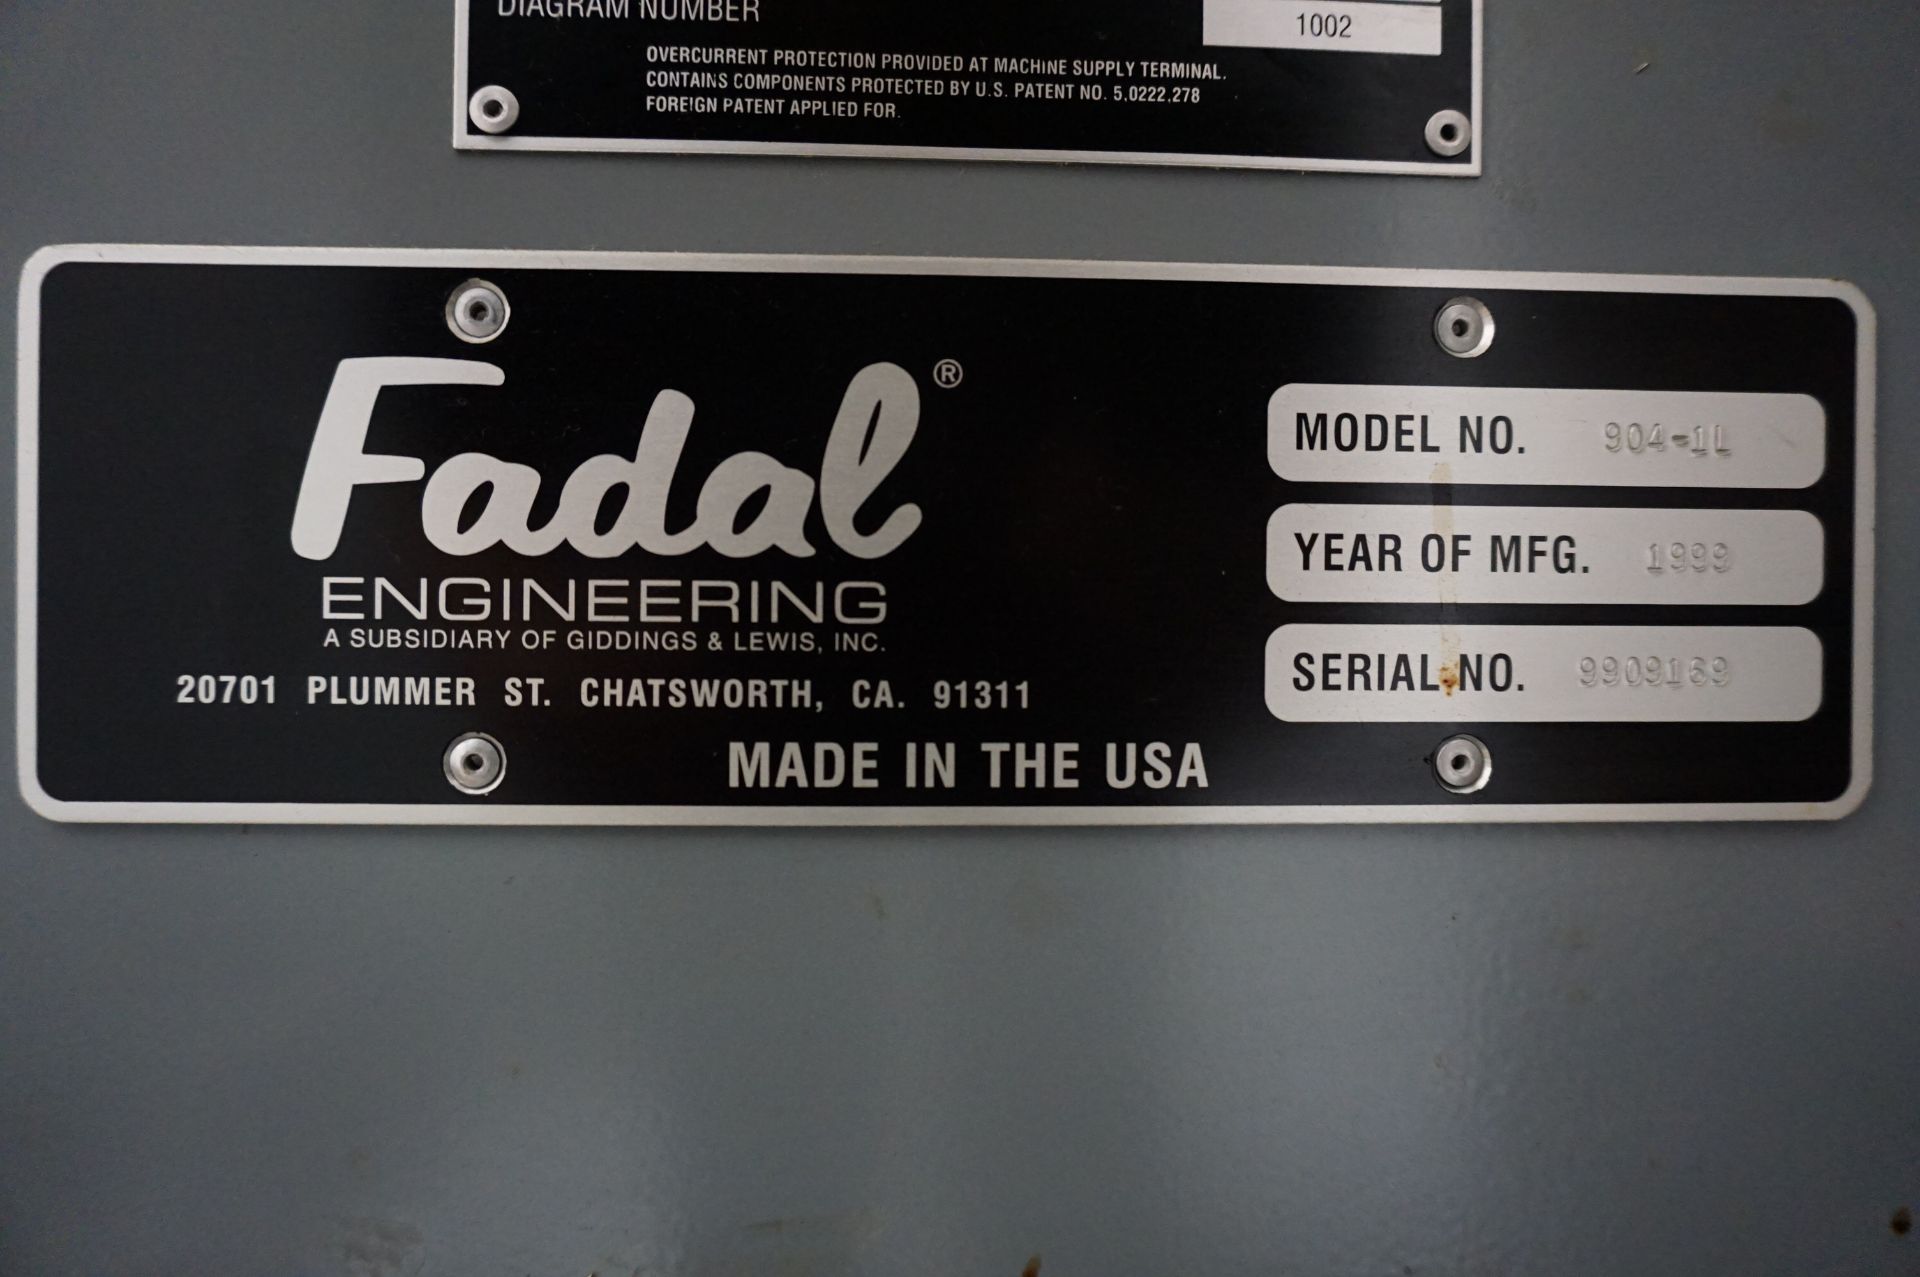 1999 FADAL VMC 2016L CNC VERTICAL MACHINING CENTER, MODEL 904-1L, S/N 9909169, 7500 RPM SPINDLE, 4TH - Image 10 of 10